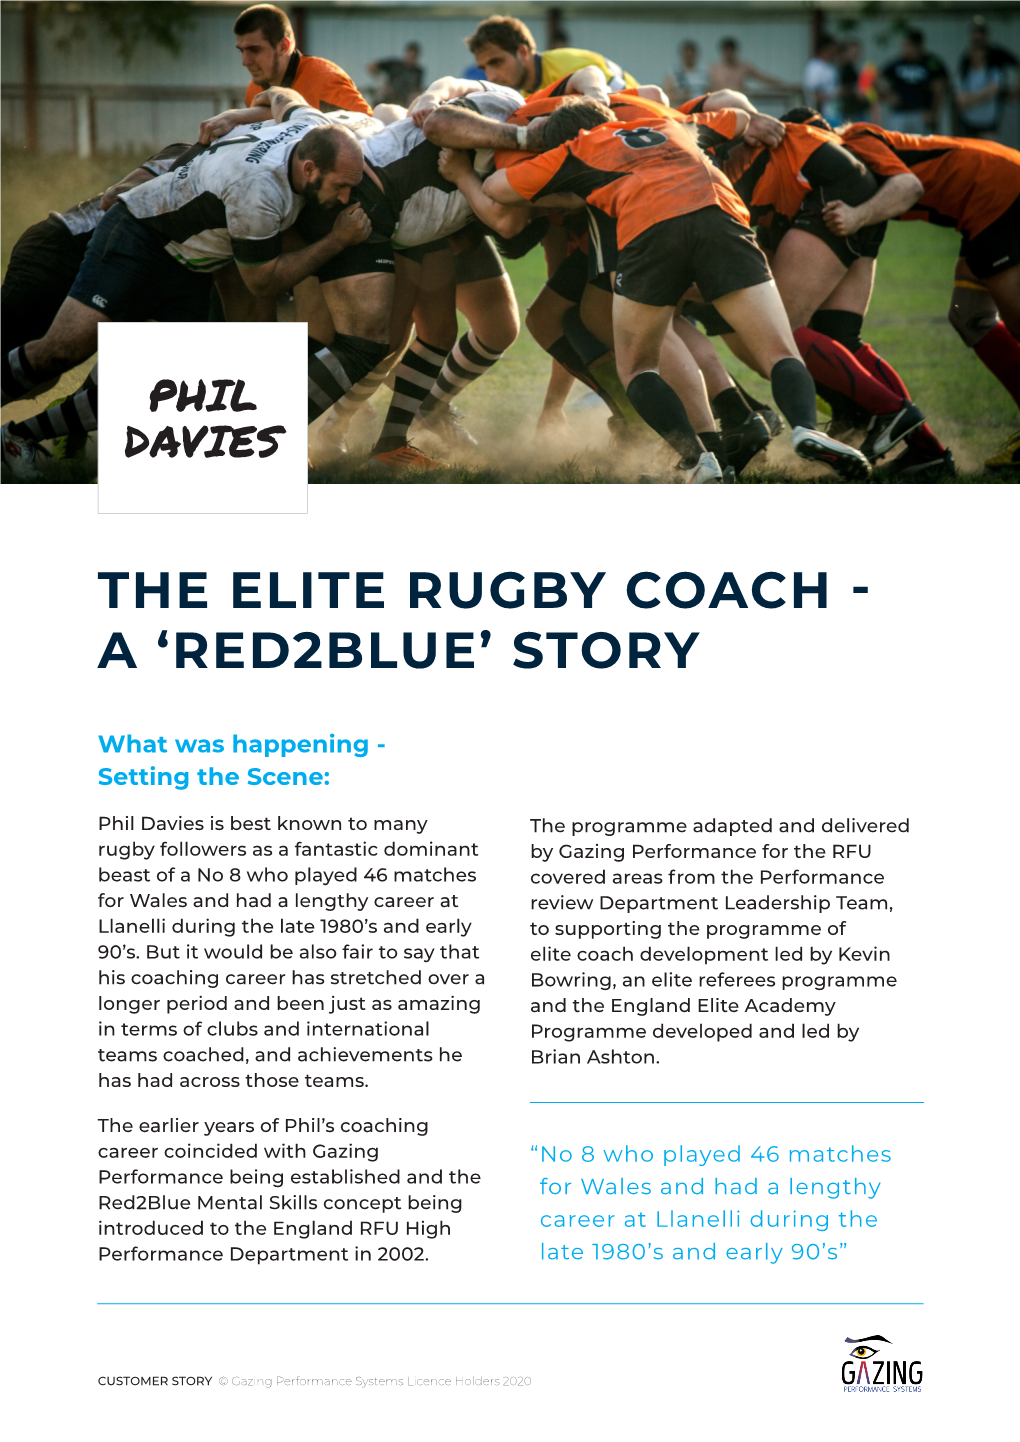 The Elite Rugby Coach - a ‘Red2blue’ Story